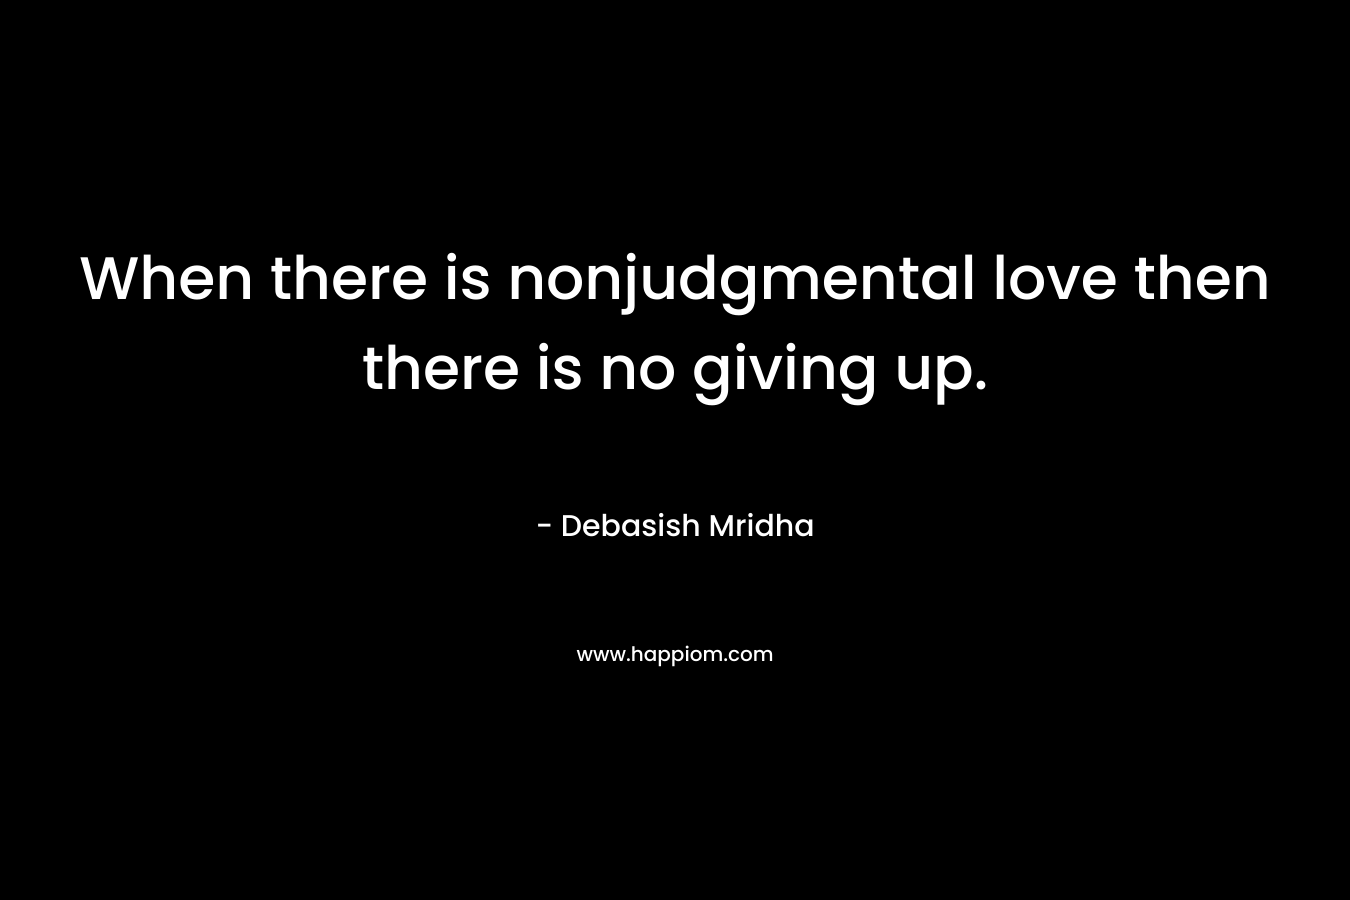 When there is nonjudgmental love then there is no giving up.